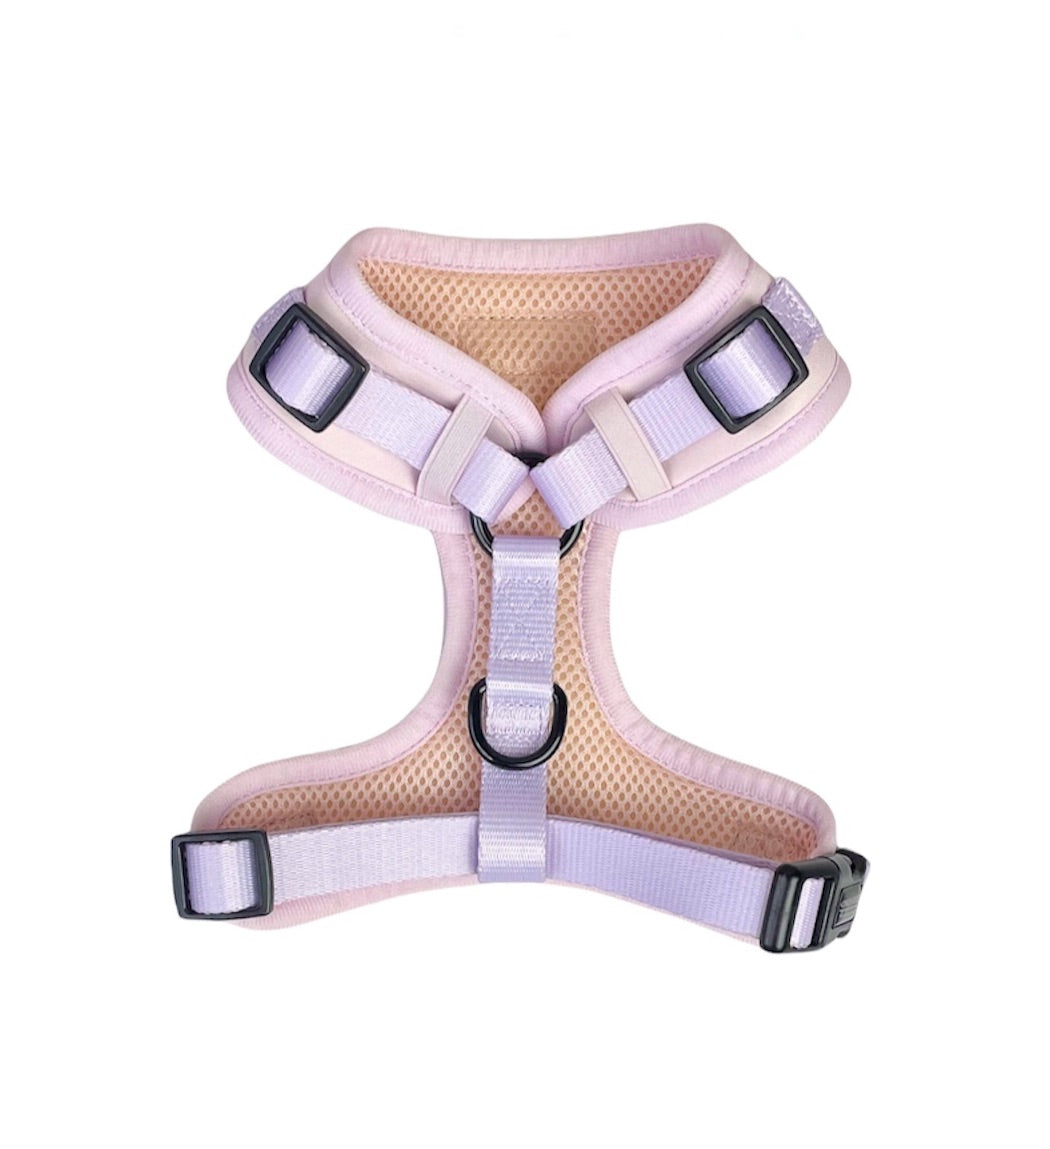 Adjustable Harness - Pretty in Pink